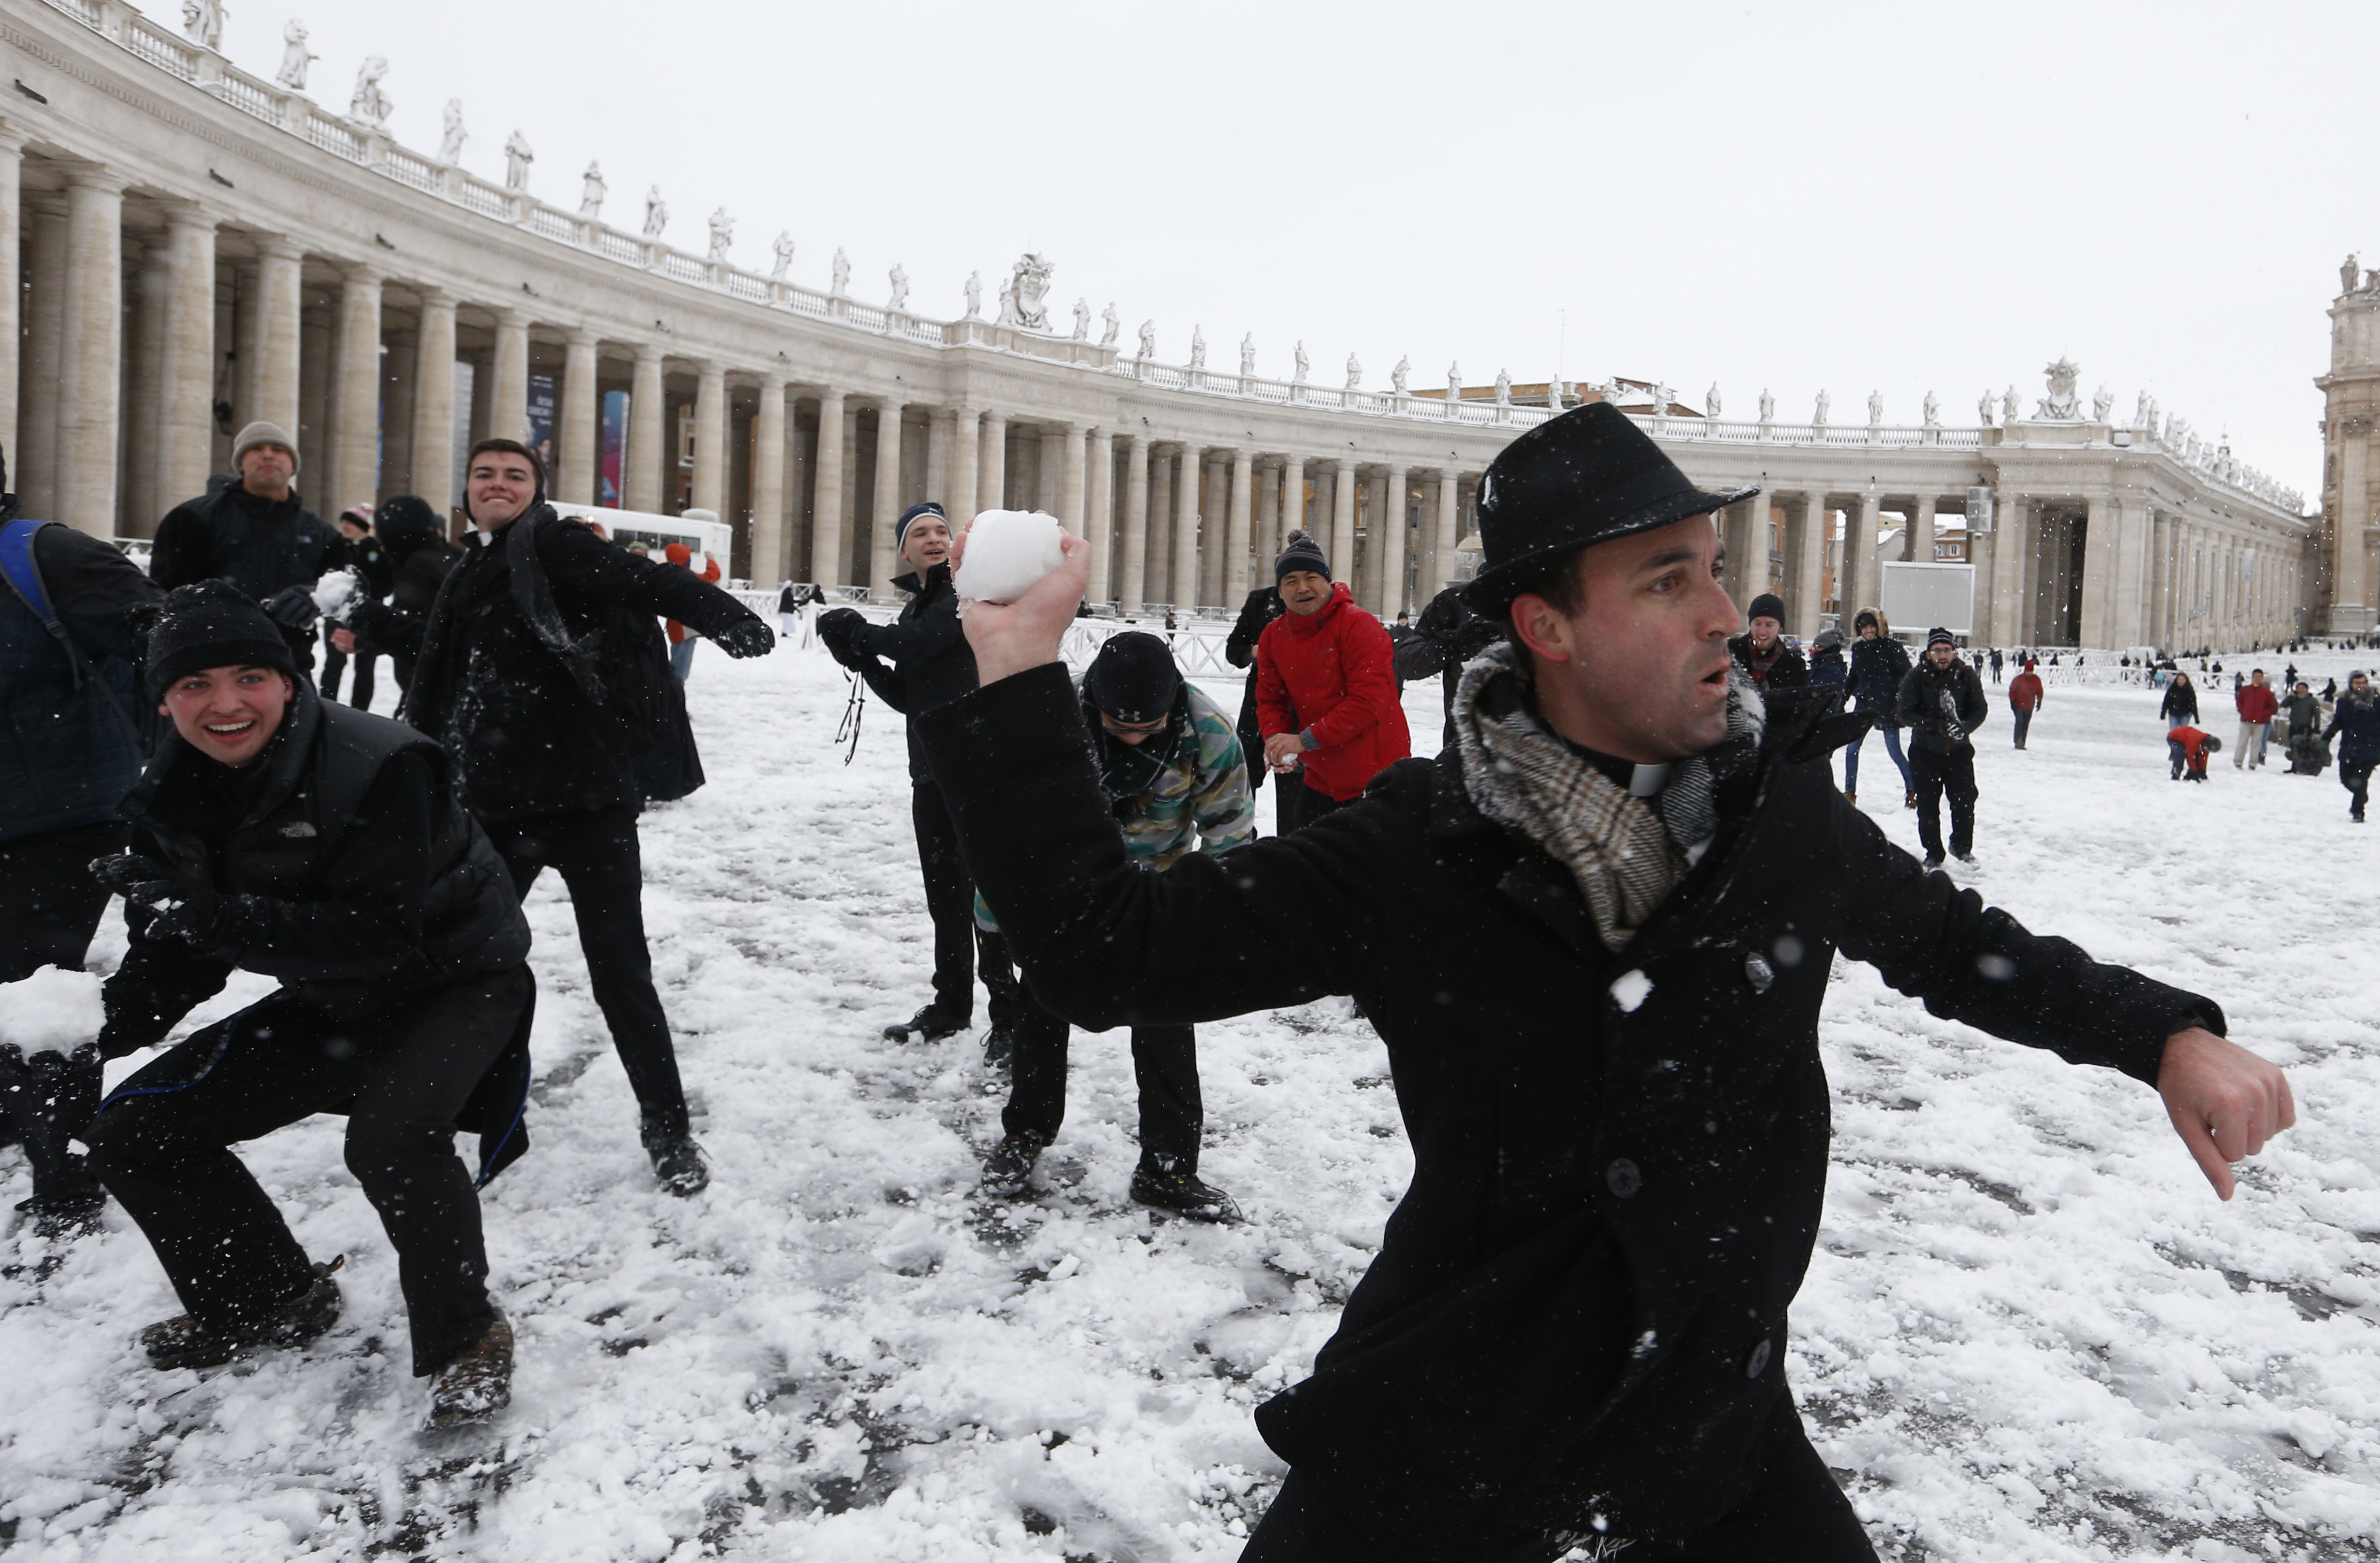 Father Robert Kilner, right, and seminarians from the Pontifical North American college engage in a snowball fight with their peers from the Venerable English College in St. Peter's Square at the Vatican after a rare snowfall Feb. 26. (CNS photo/Paul Haring)